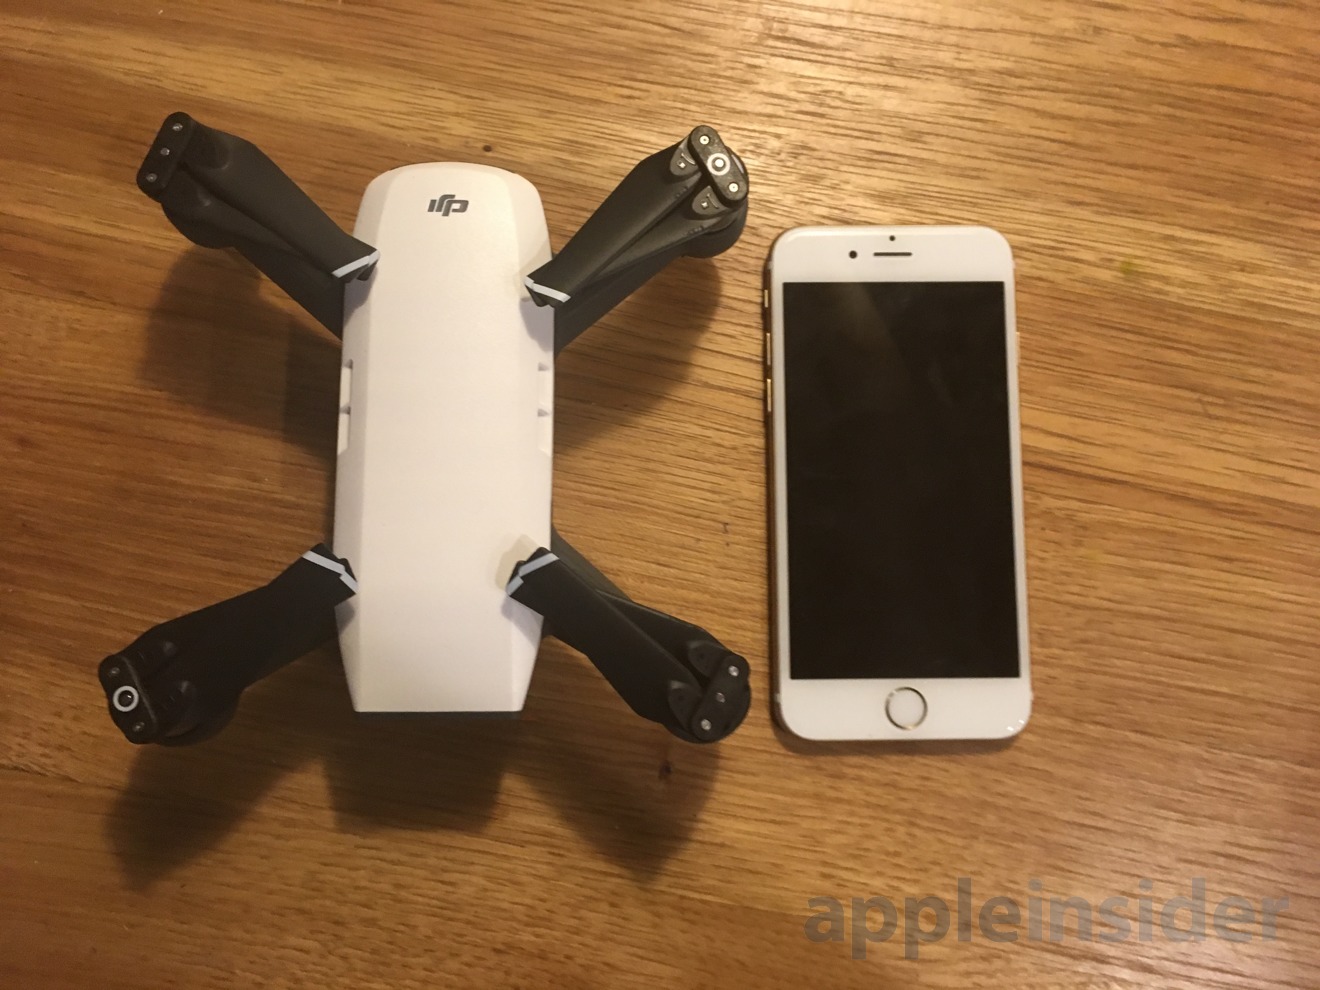 Hands-on: $499 gesture-controlled DJI Spark drone offers 